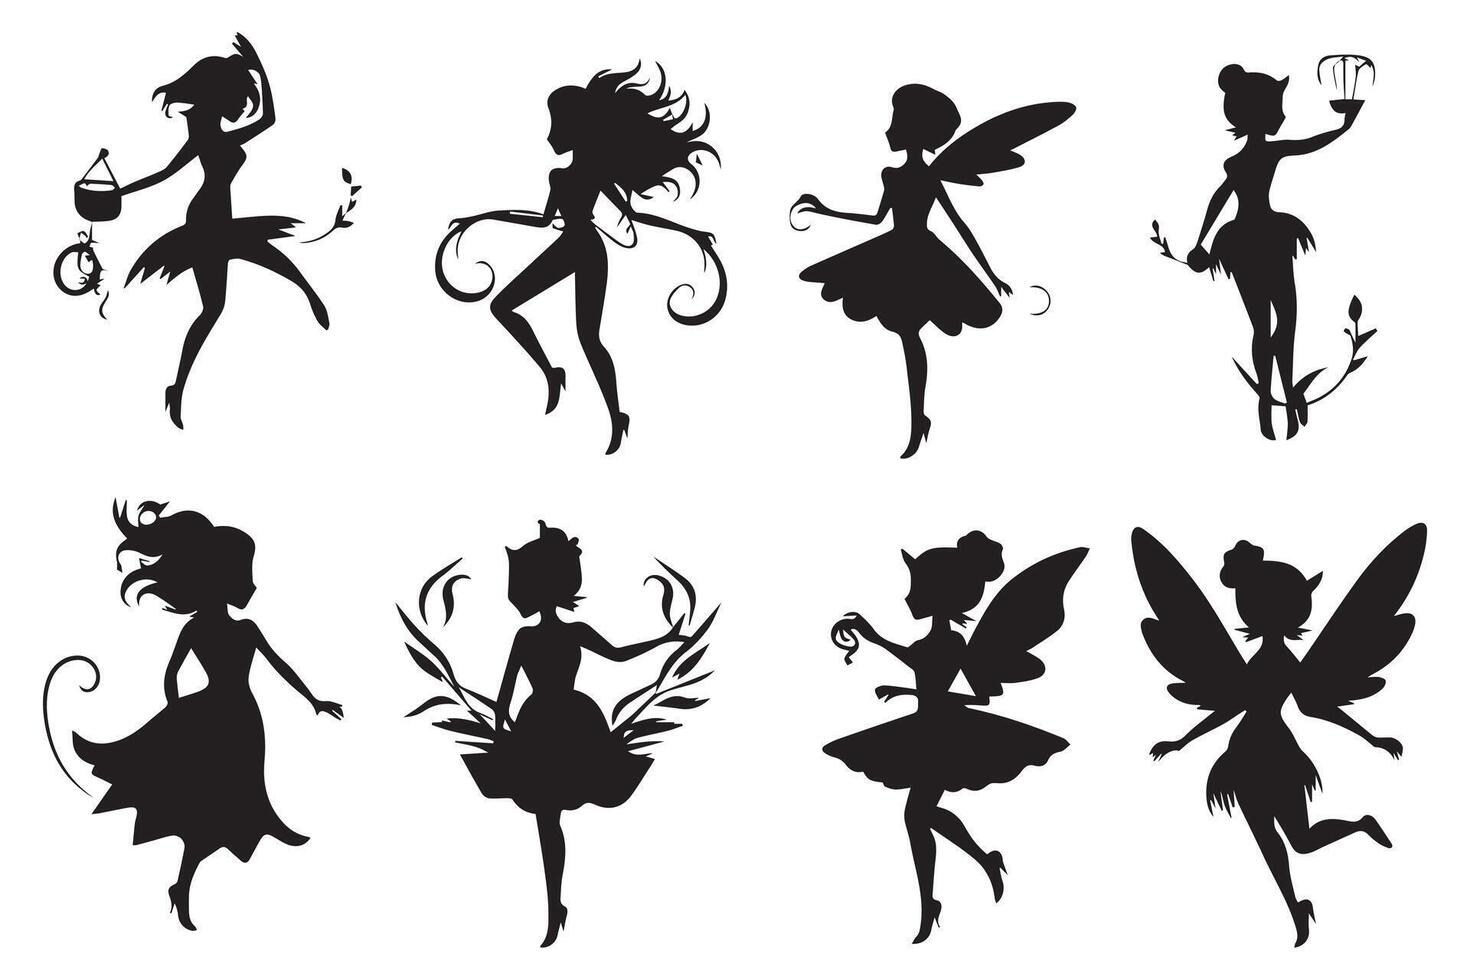 Set of silhouettes of fairies isolated on white background. Magical fairies in the cartoon style free design vector